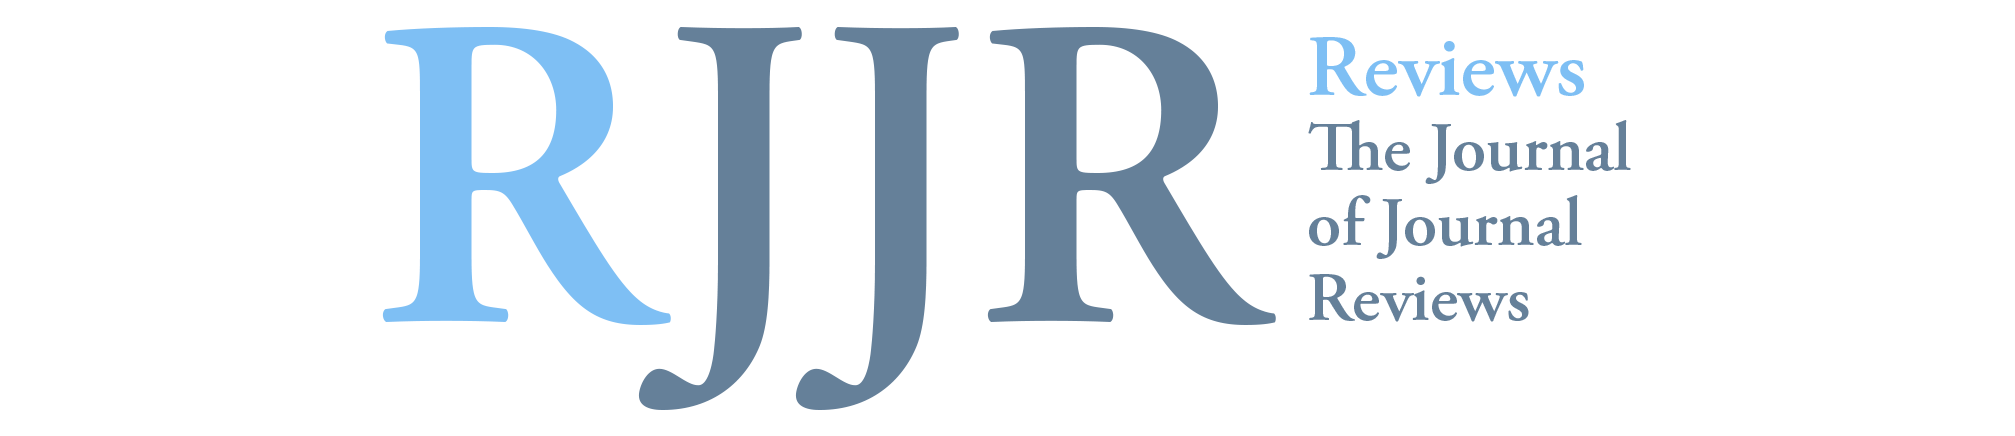 RJJR: Reviews The Journal of Journal Reviews